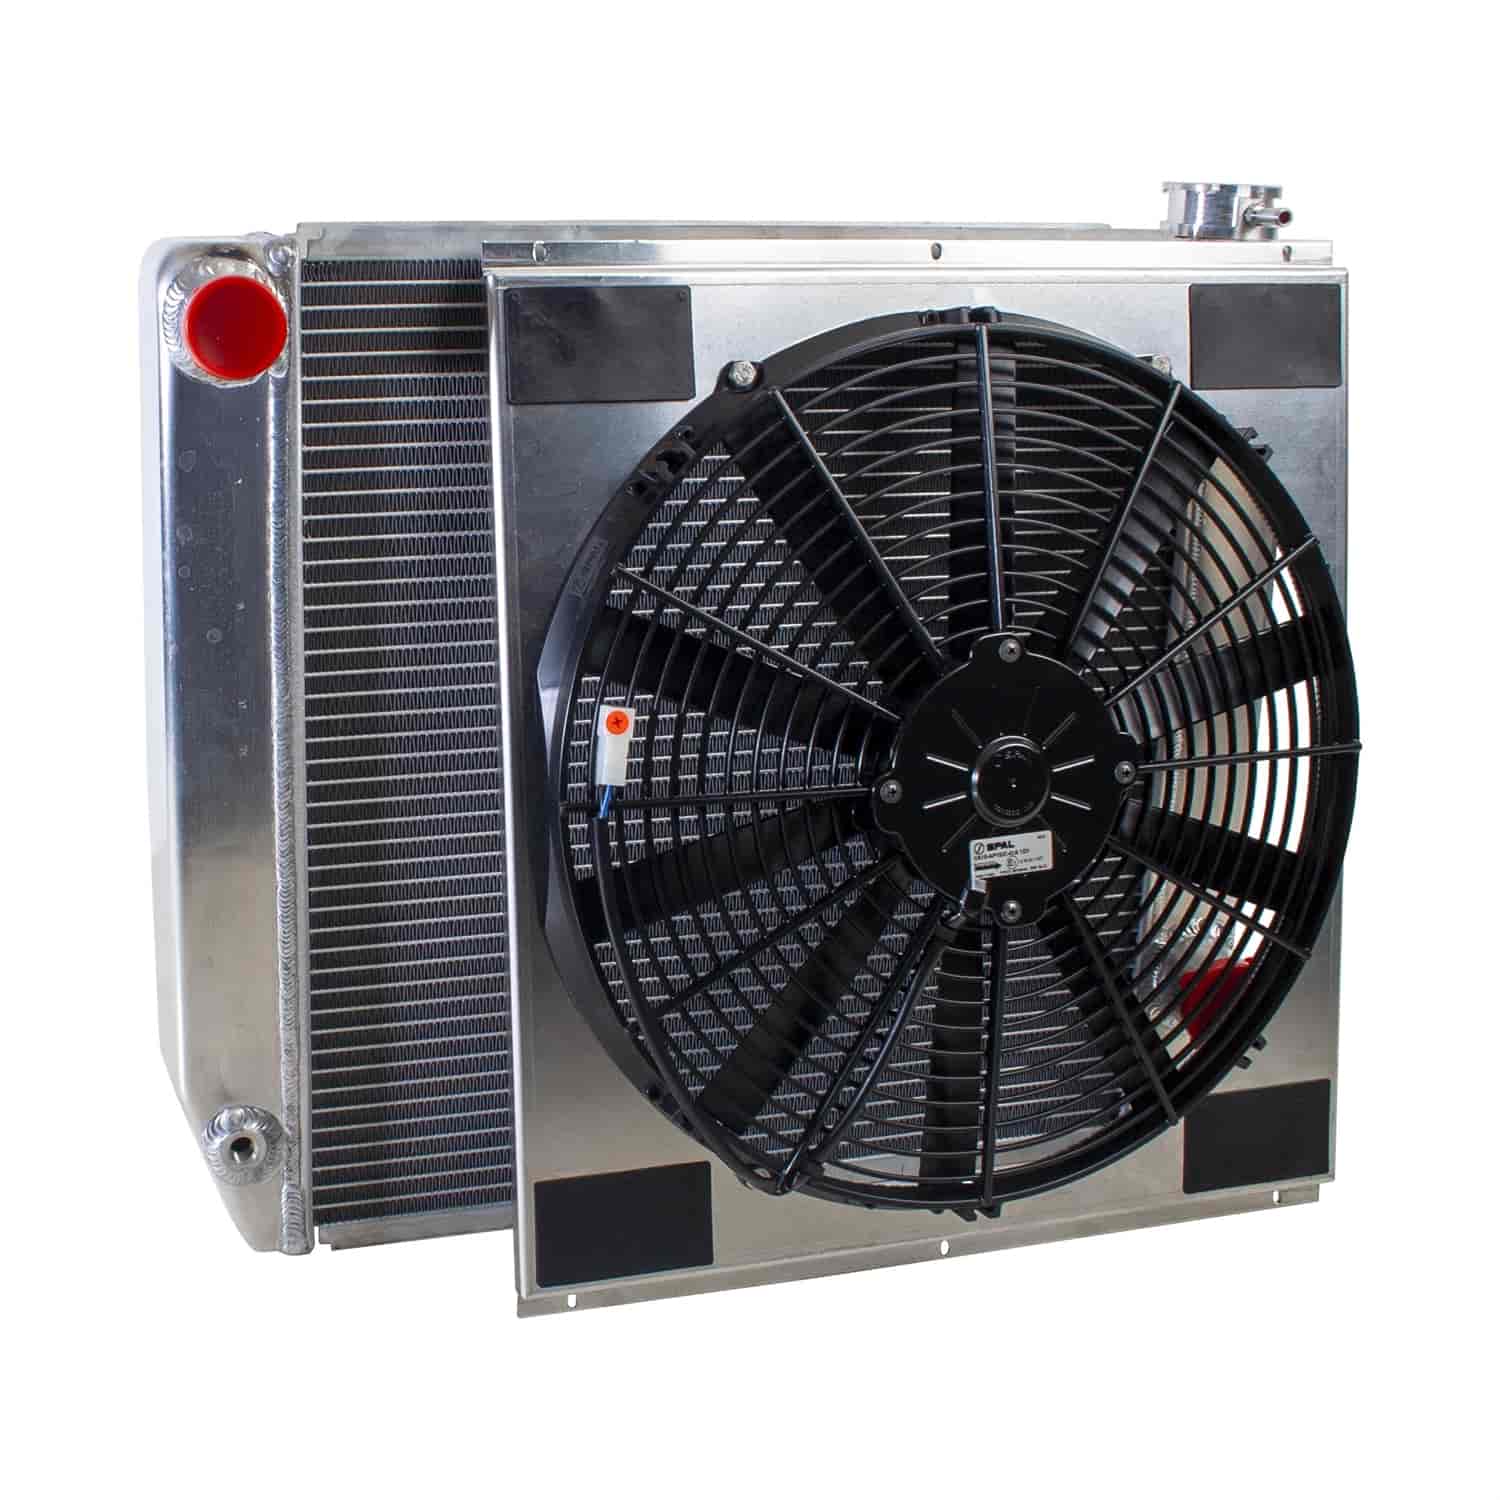 ClassicCool ComboUnit Universal Fit Radiator and Fan Single Pass Crossflow Design 22" x 19" with No Options